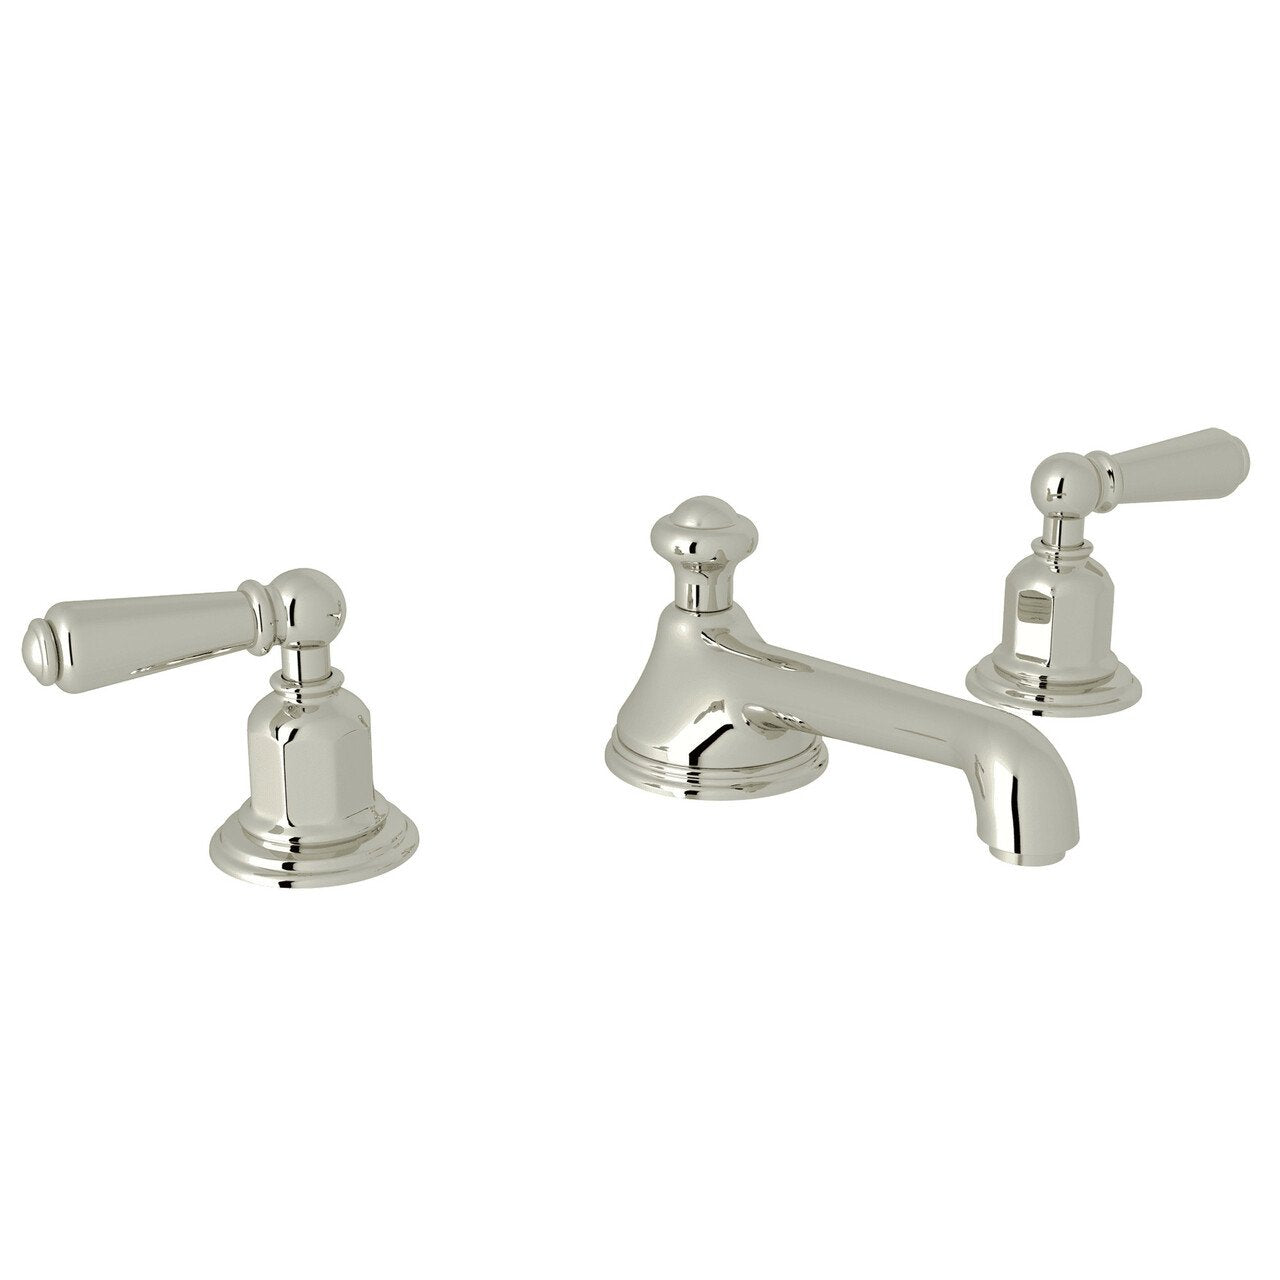 Perrin & Rowe Edwardian Low Level Spout Widespread Bathroom Faucet - BNGBath